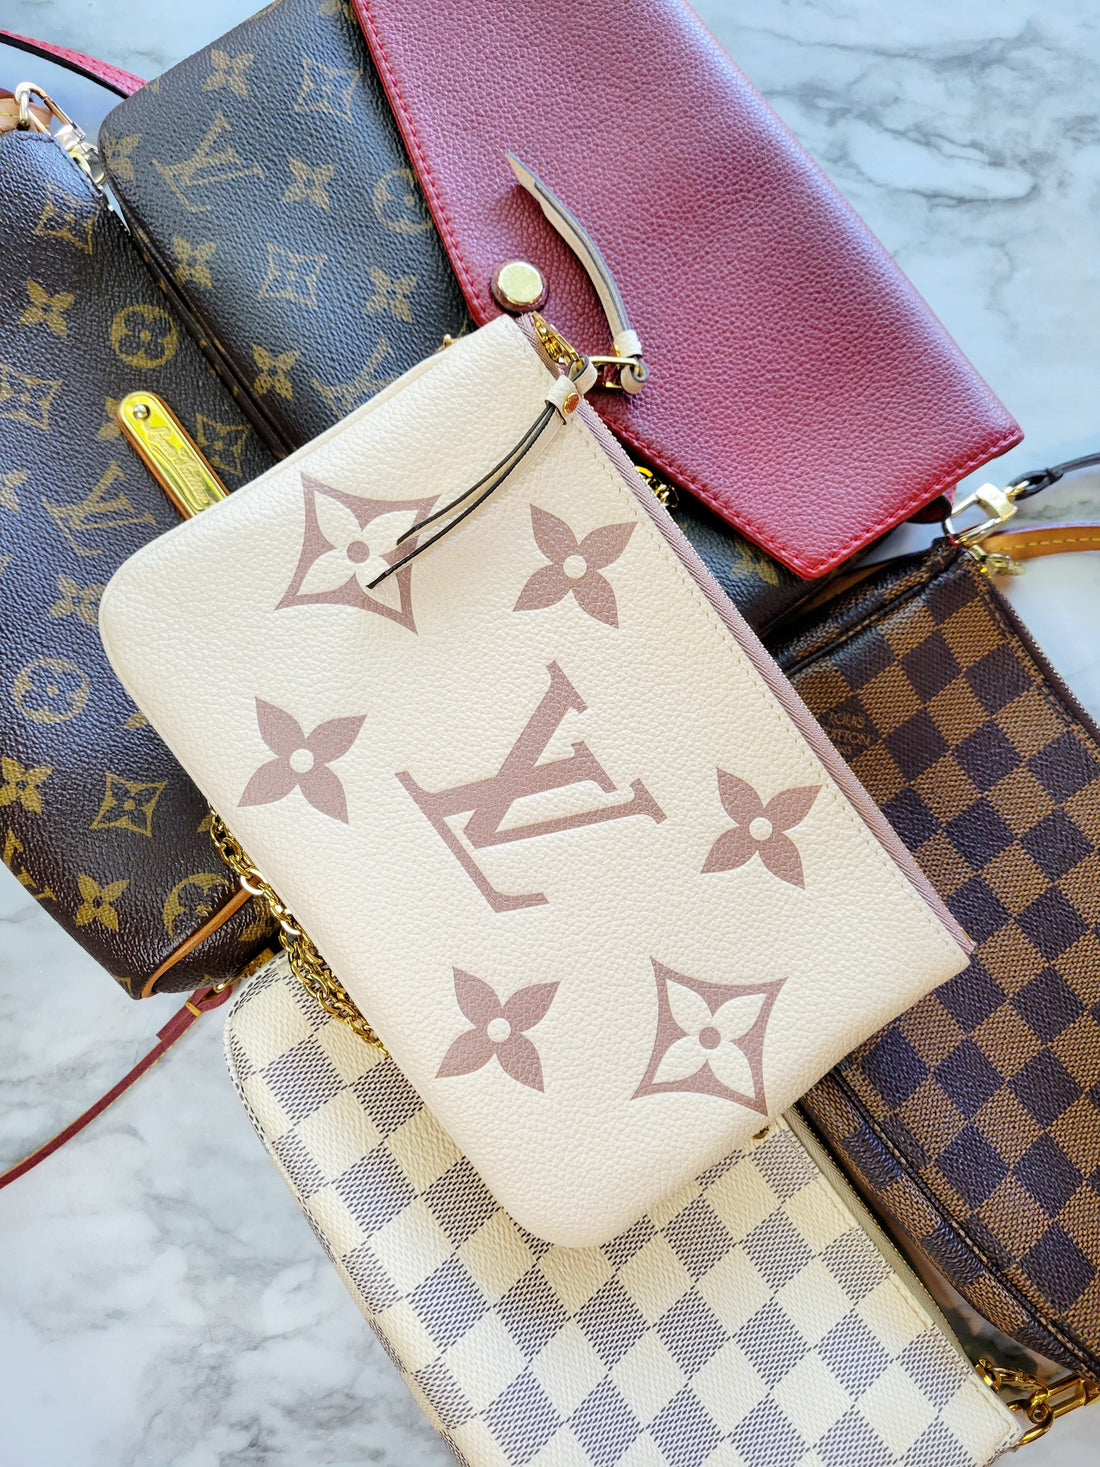 The Iconic Legacy of Louis Vuitton